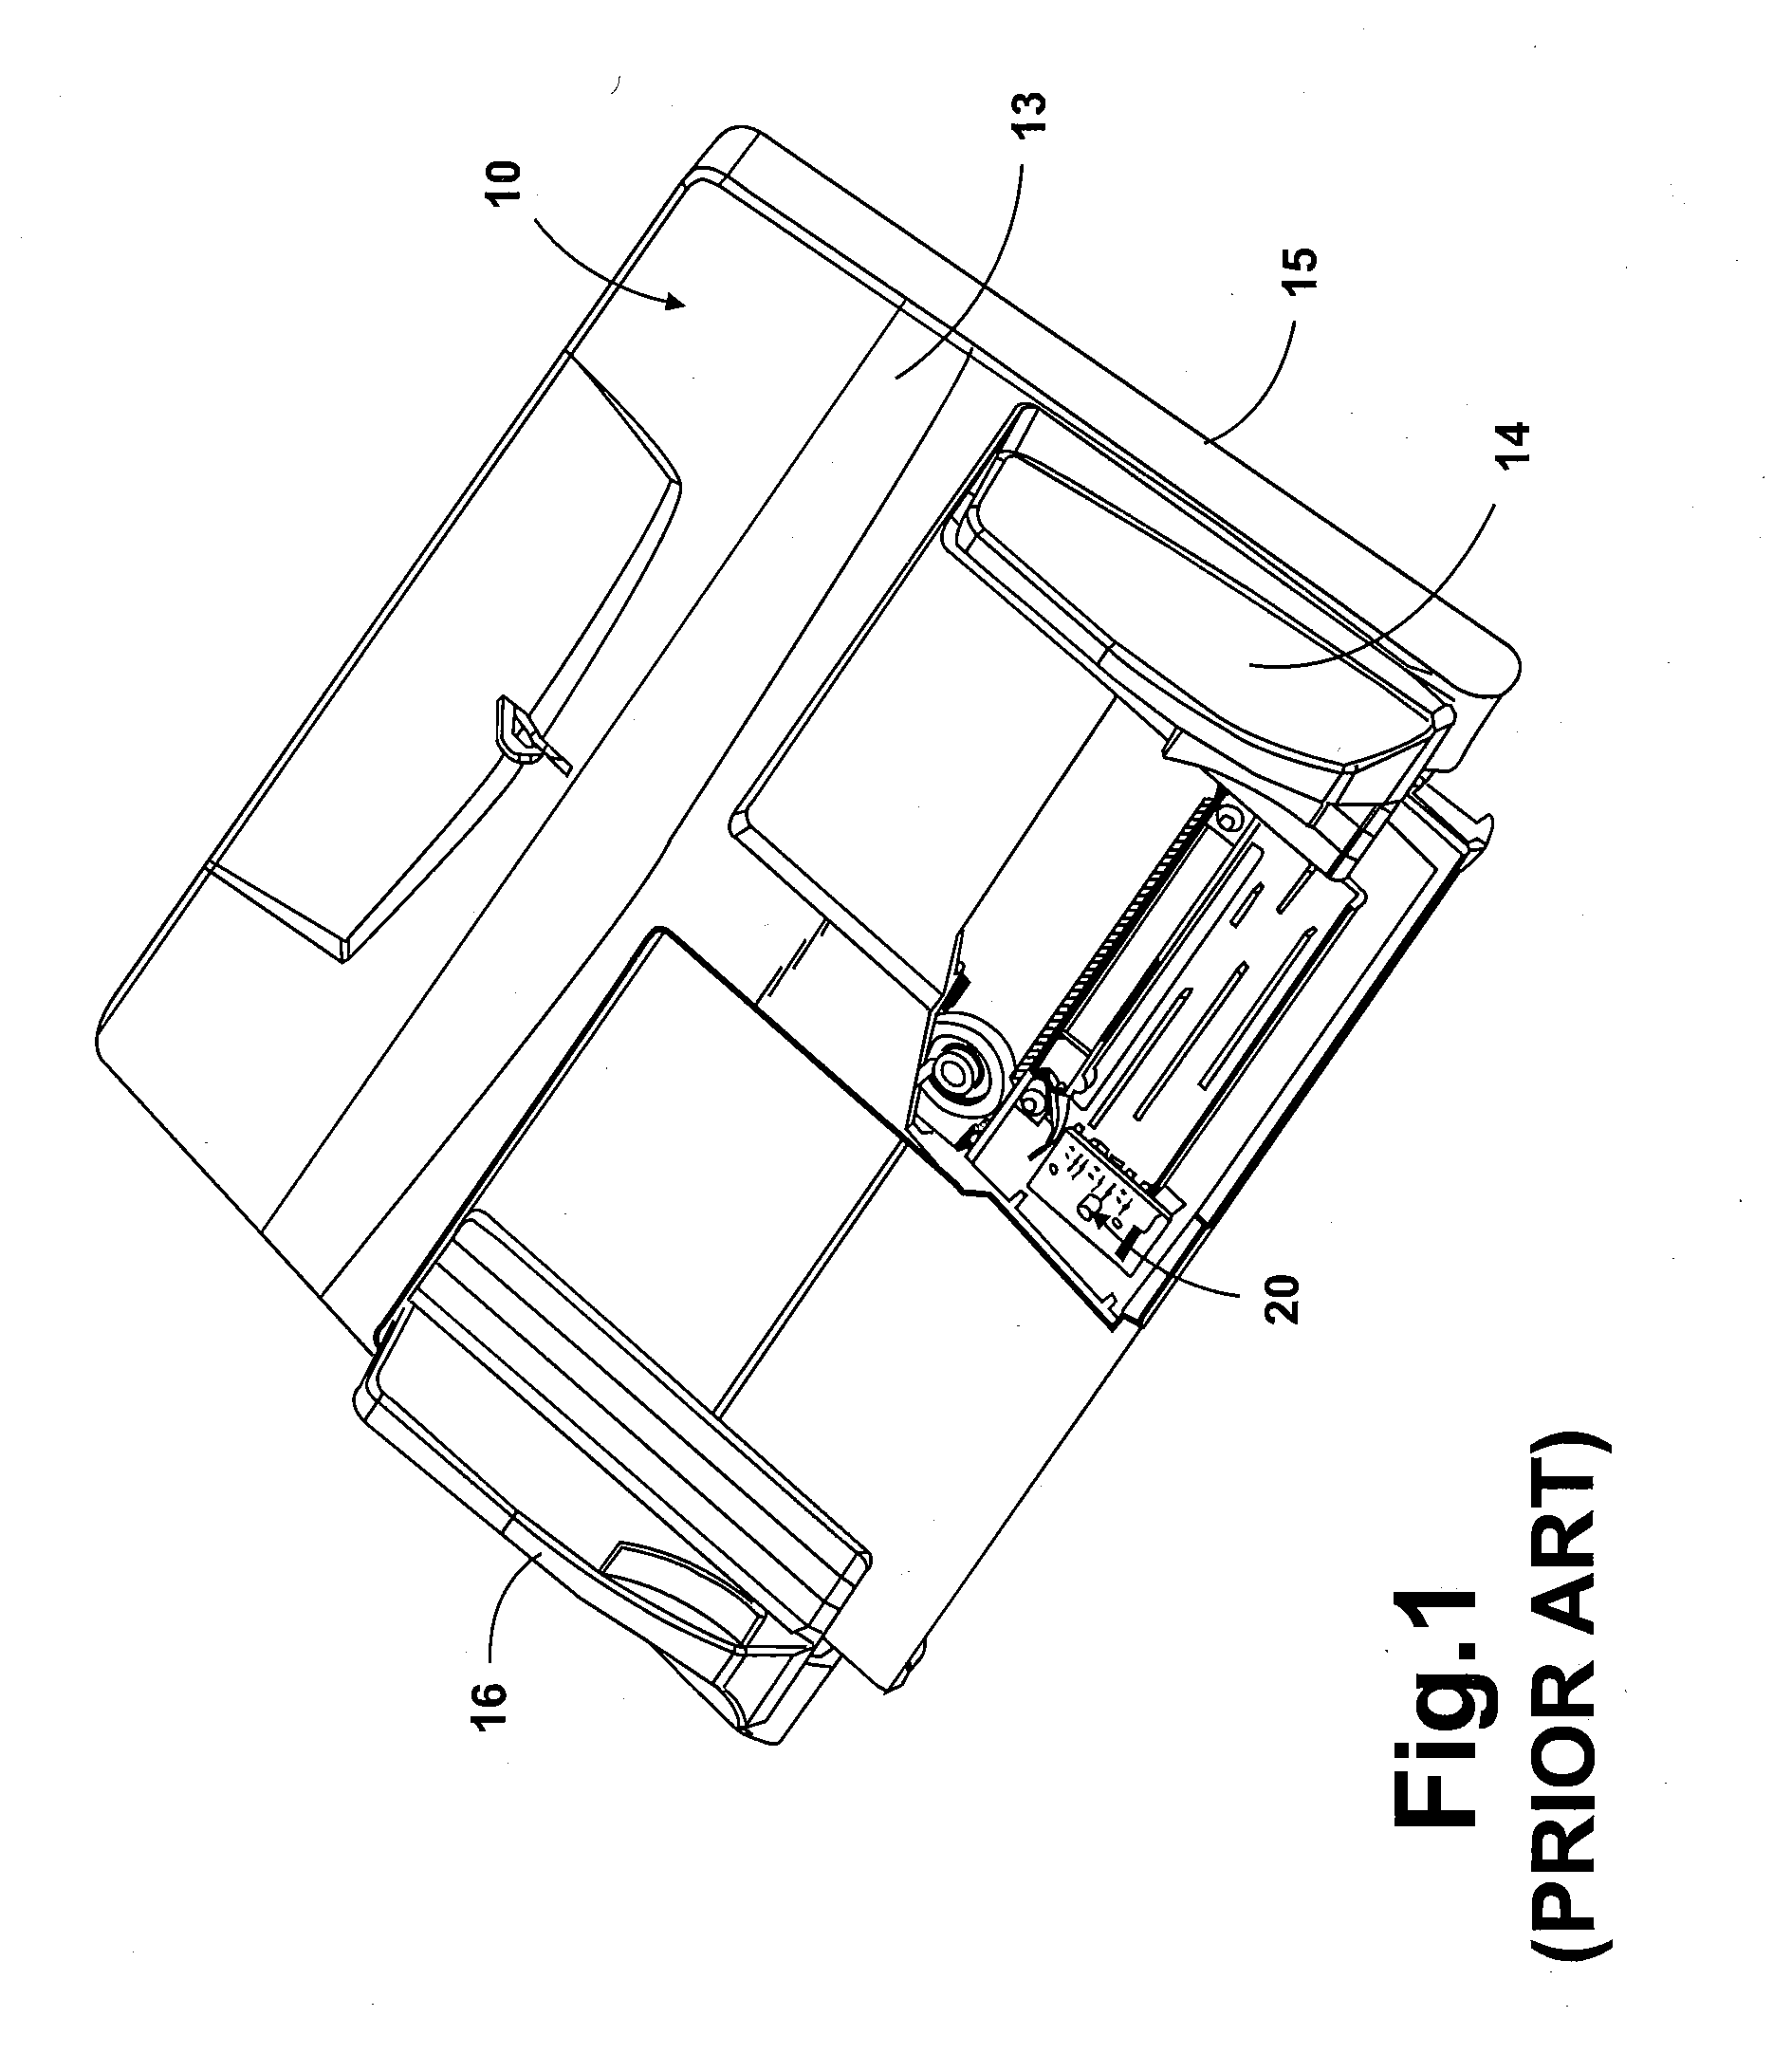 Automatic document feeder having document size detecting device